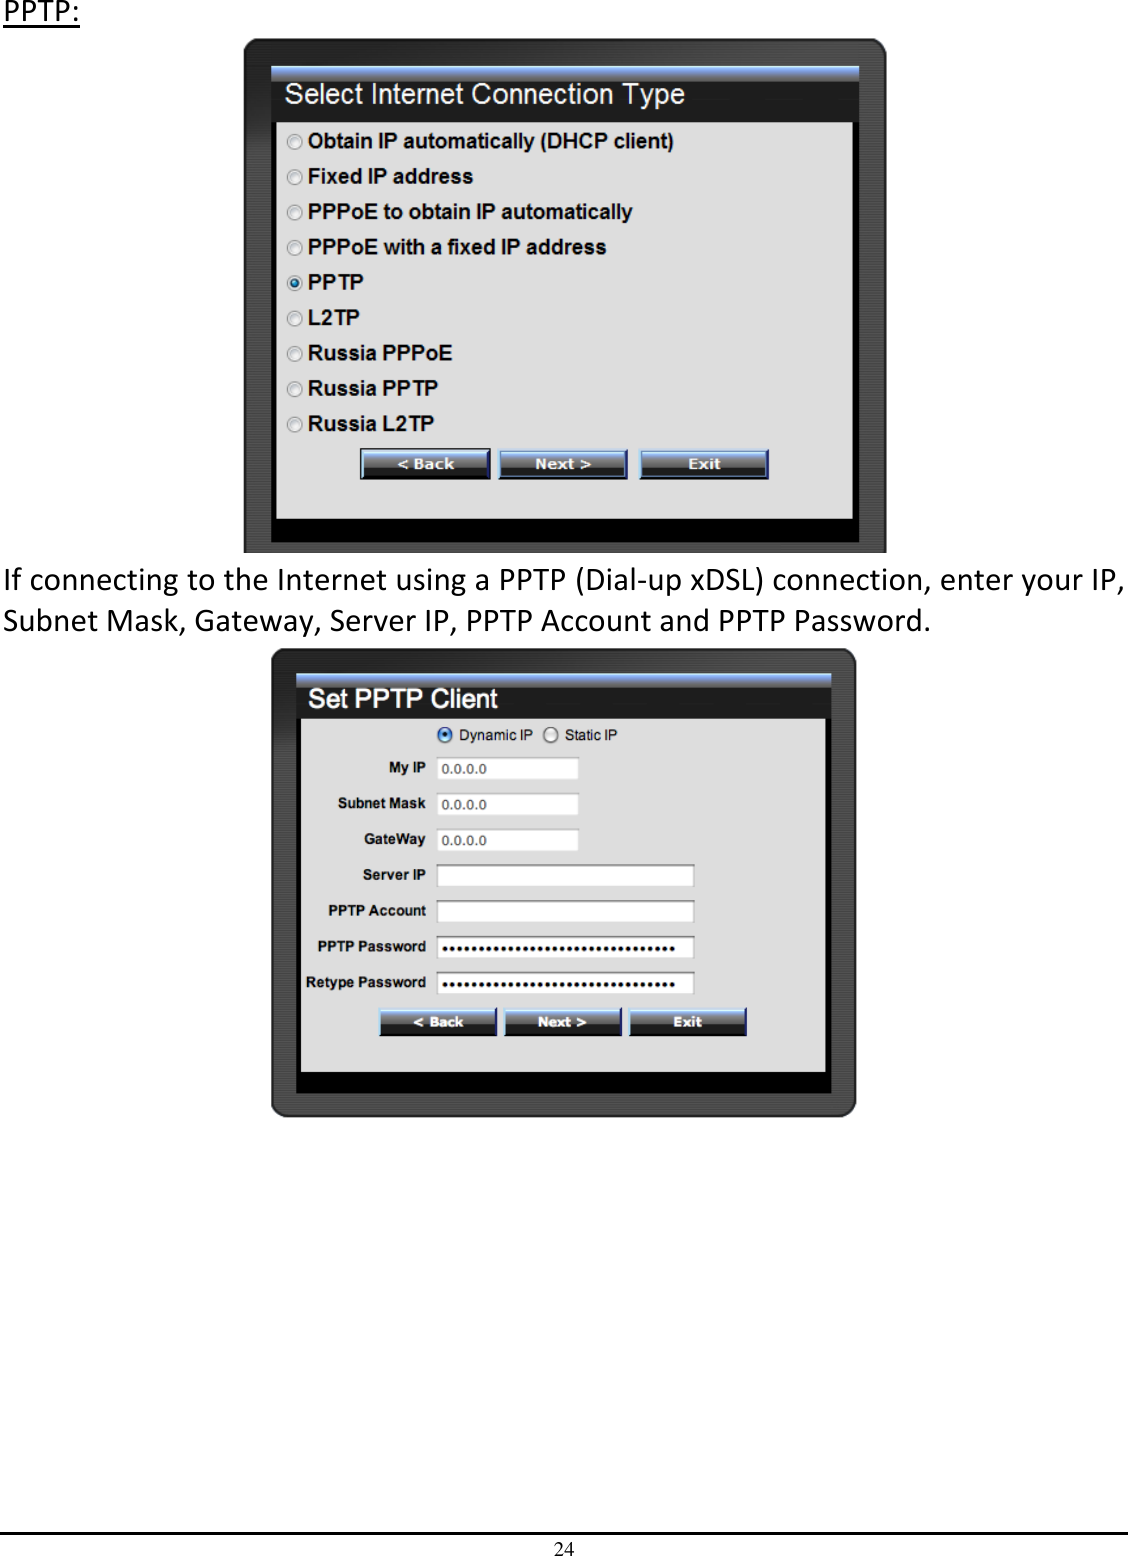 24 PPTP:  If connecting to the Internet using a PPTP (Dial-up xDSL) connection, enter your IP, Subnet Mask, Gateway, Server IP, PPTP Account and PPTP Password.    